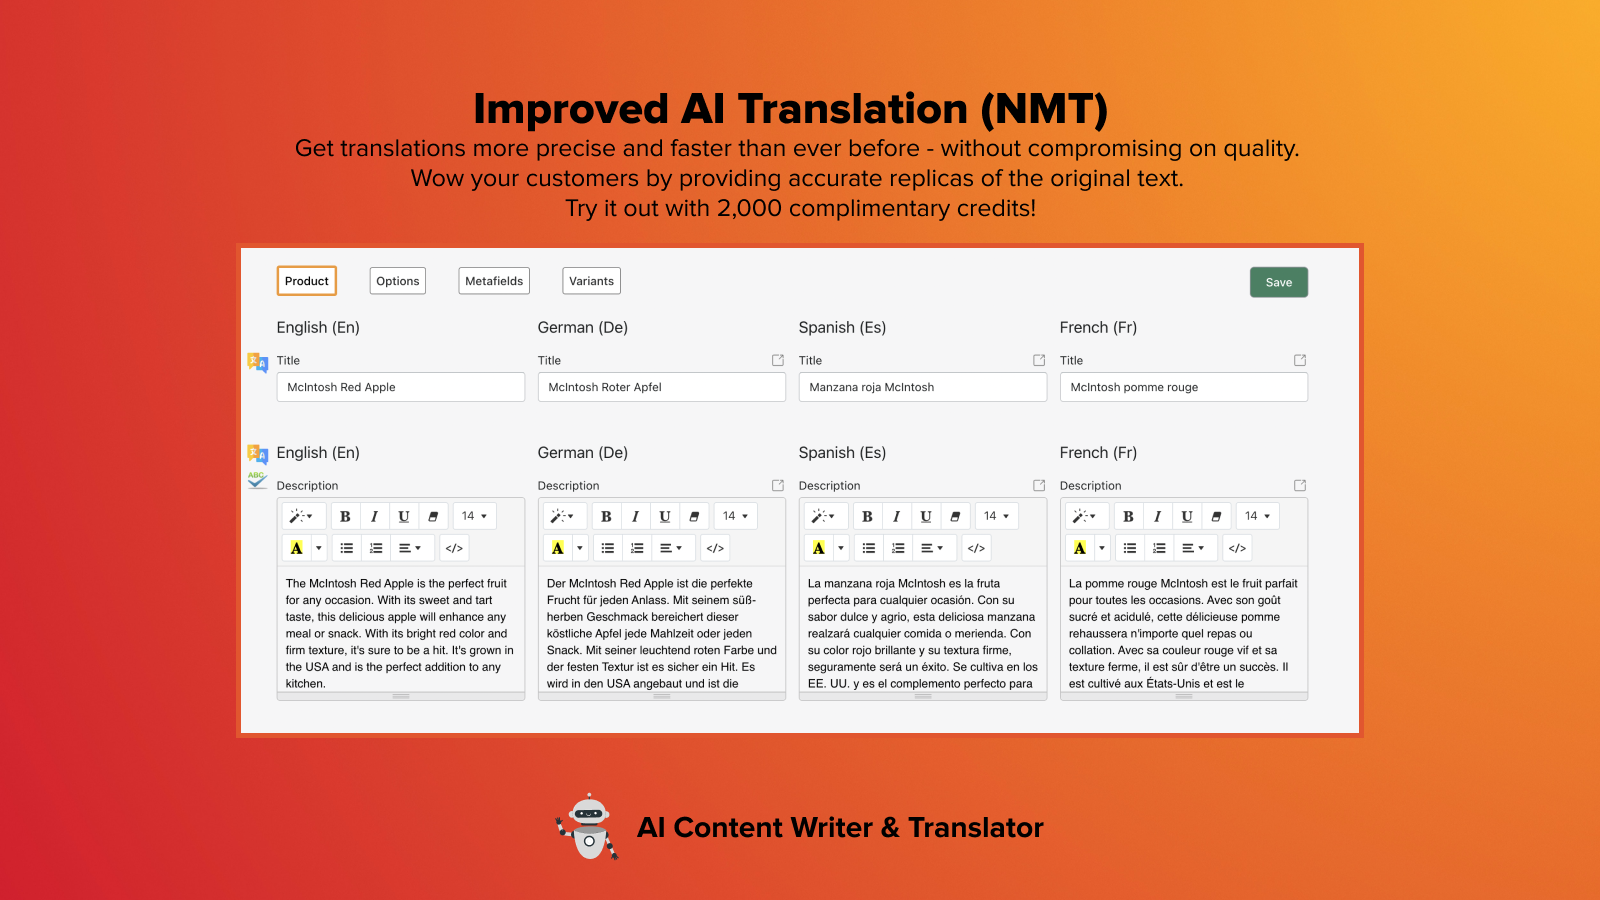 Get translations more precise and faster than ever before.